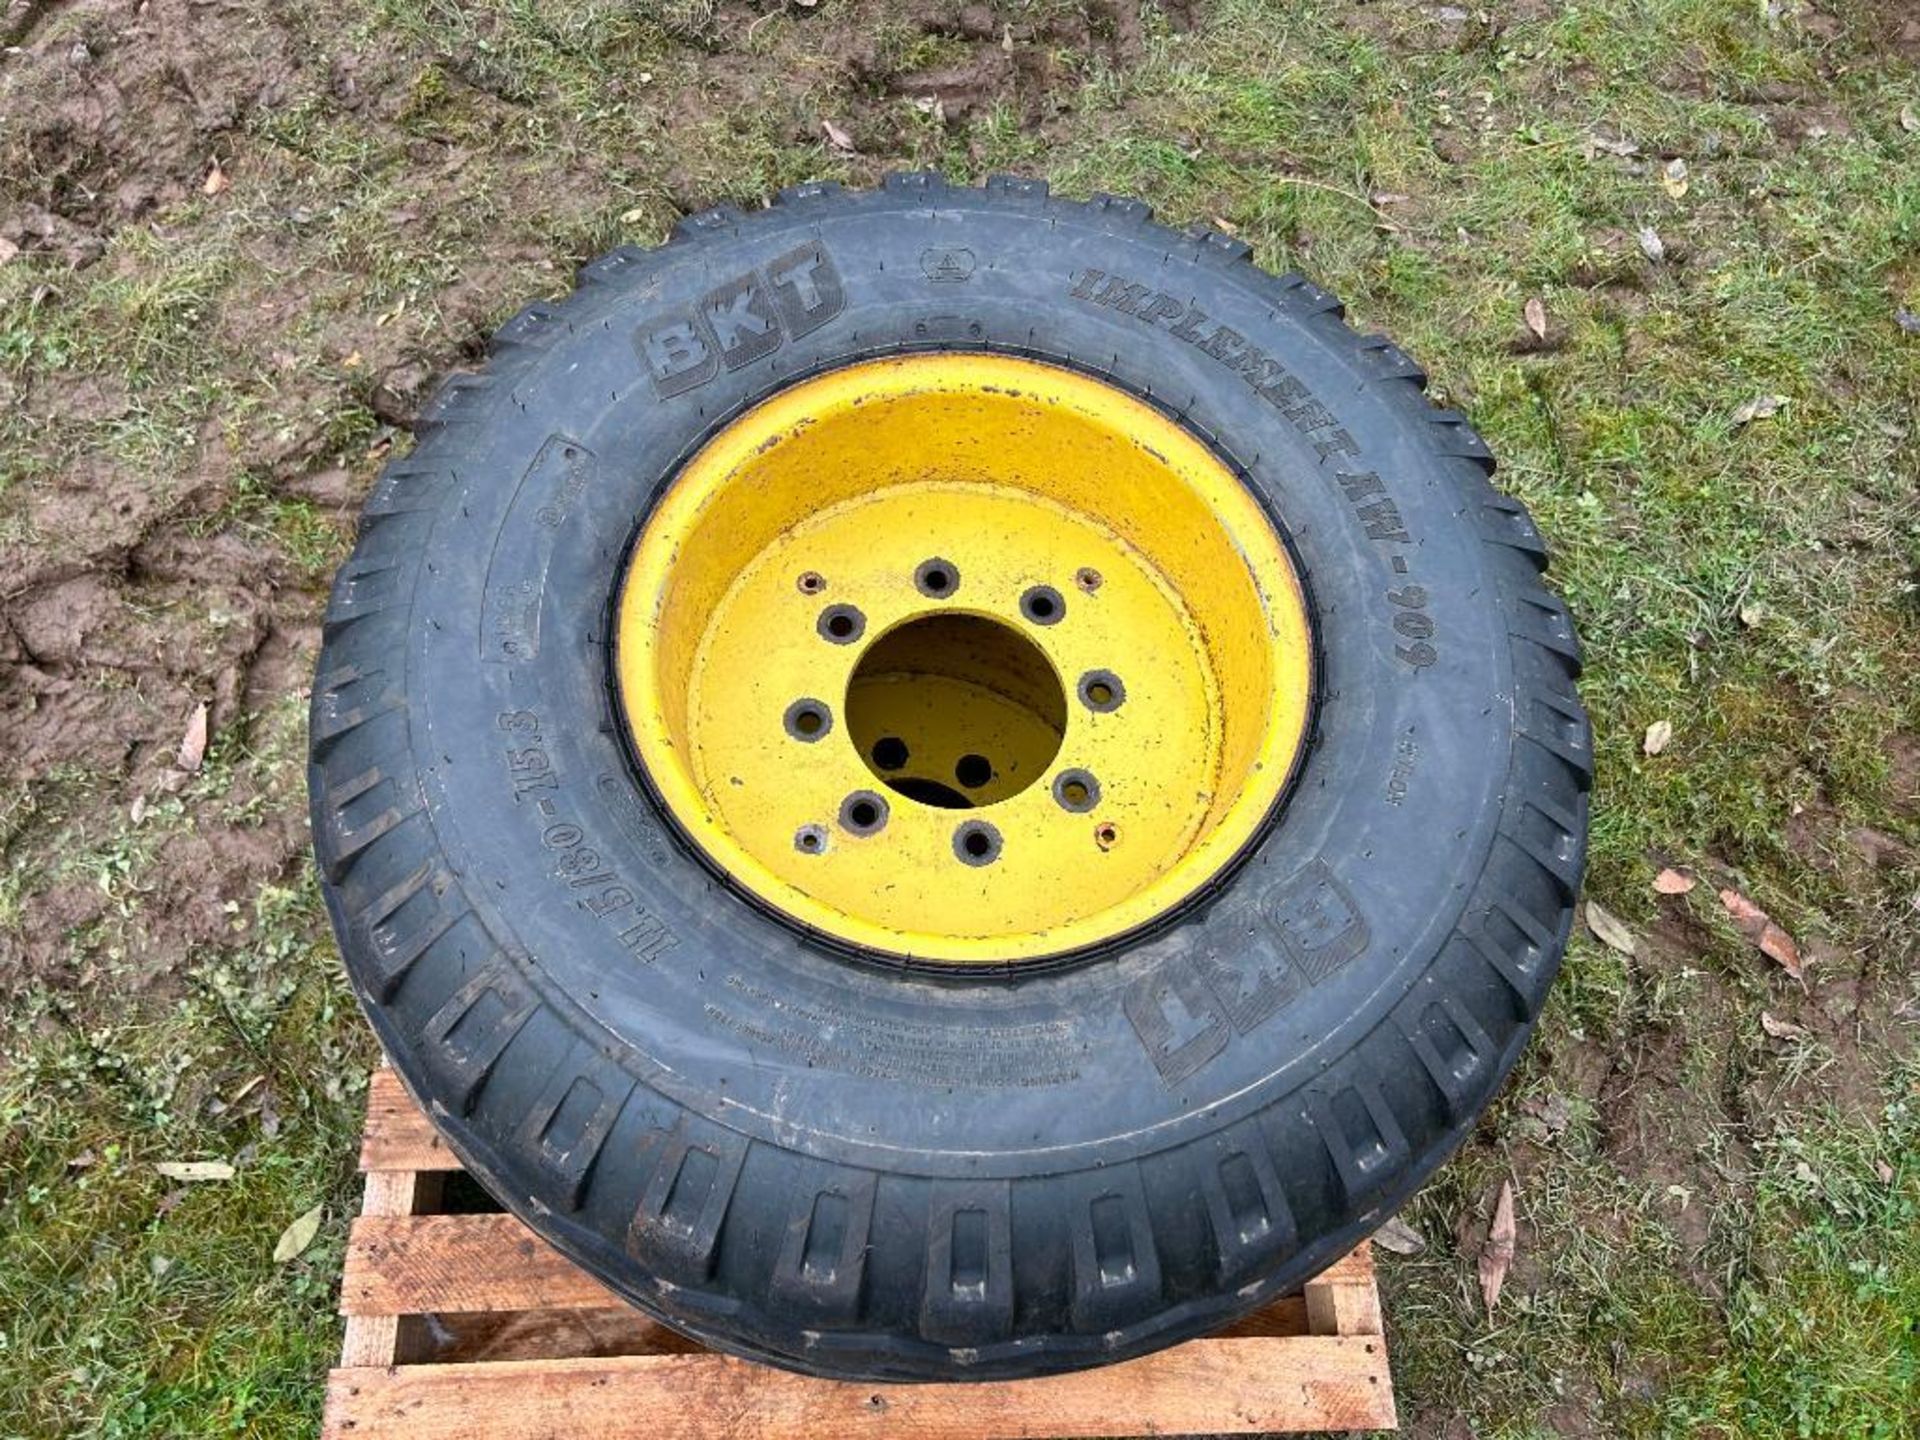 Pair of BKT 11.5/80-15.3 tyres and wheels to fit JD 6300